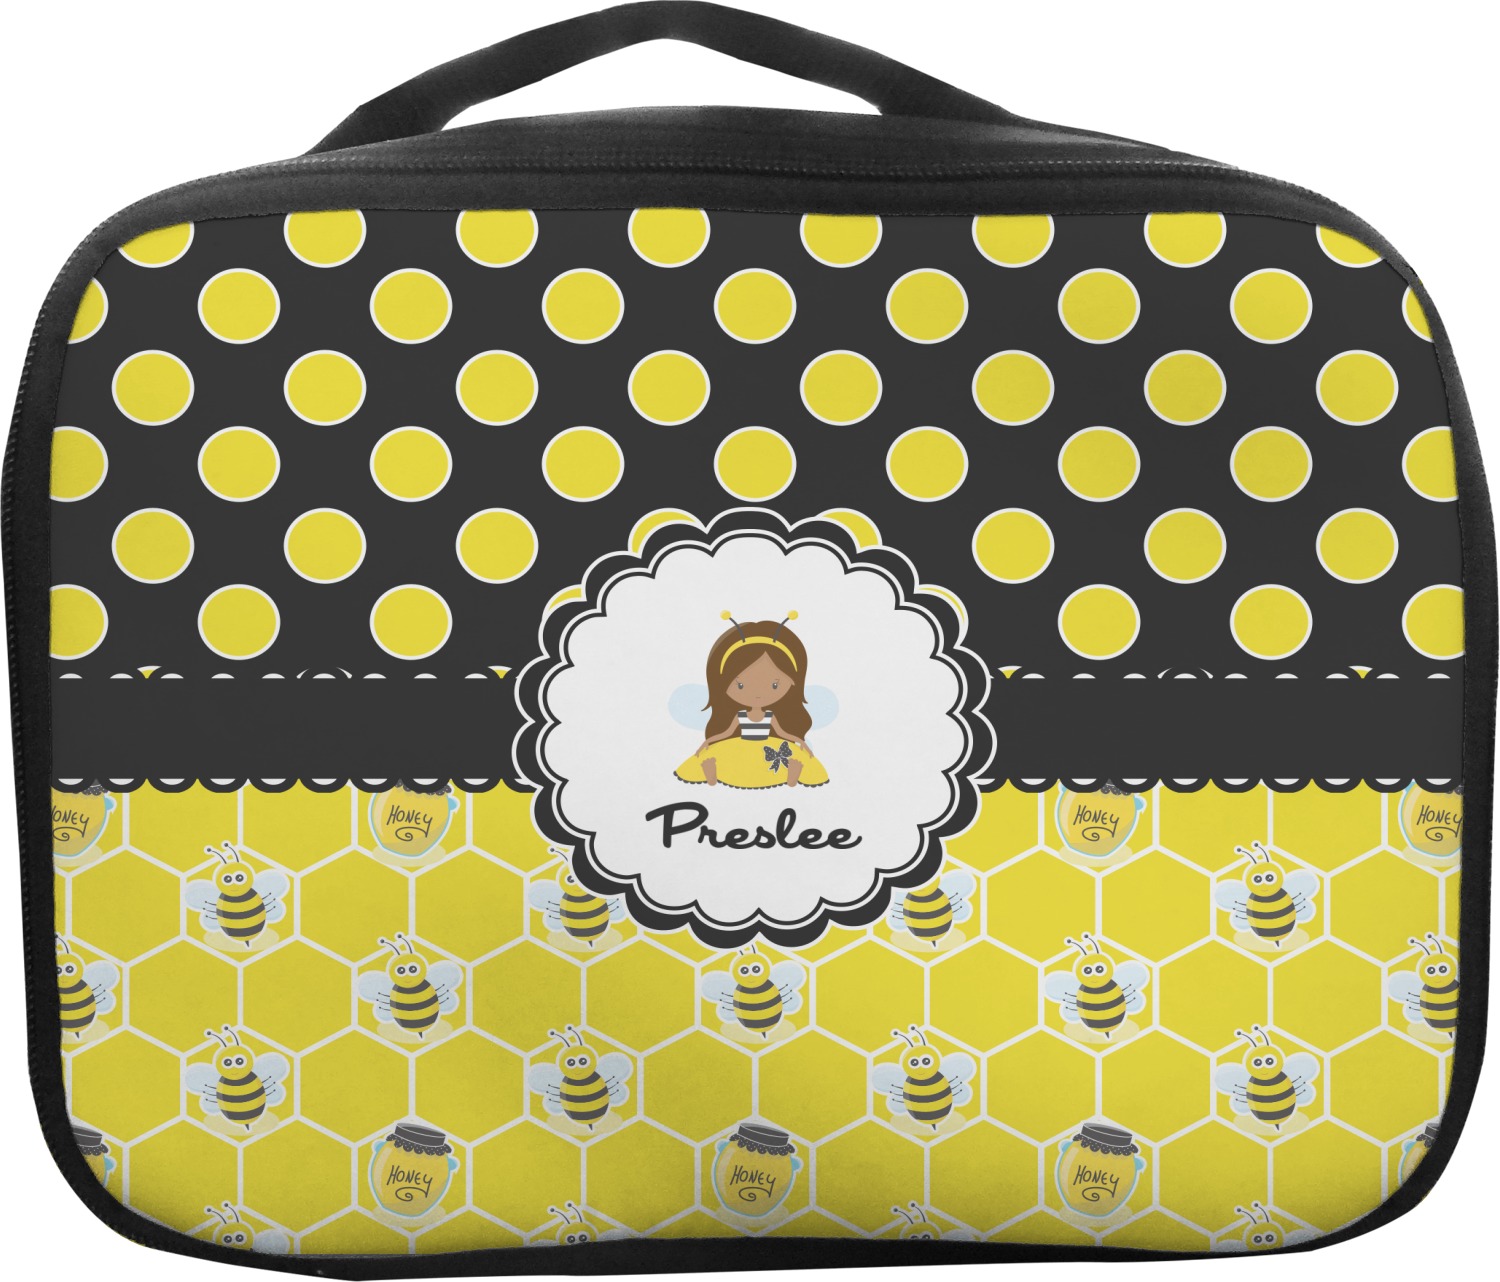 Custom Insulated Lunch Bags | Design & Preview Online - YouCustomizeIt